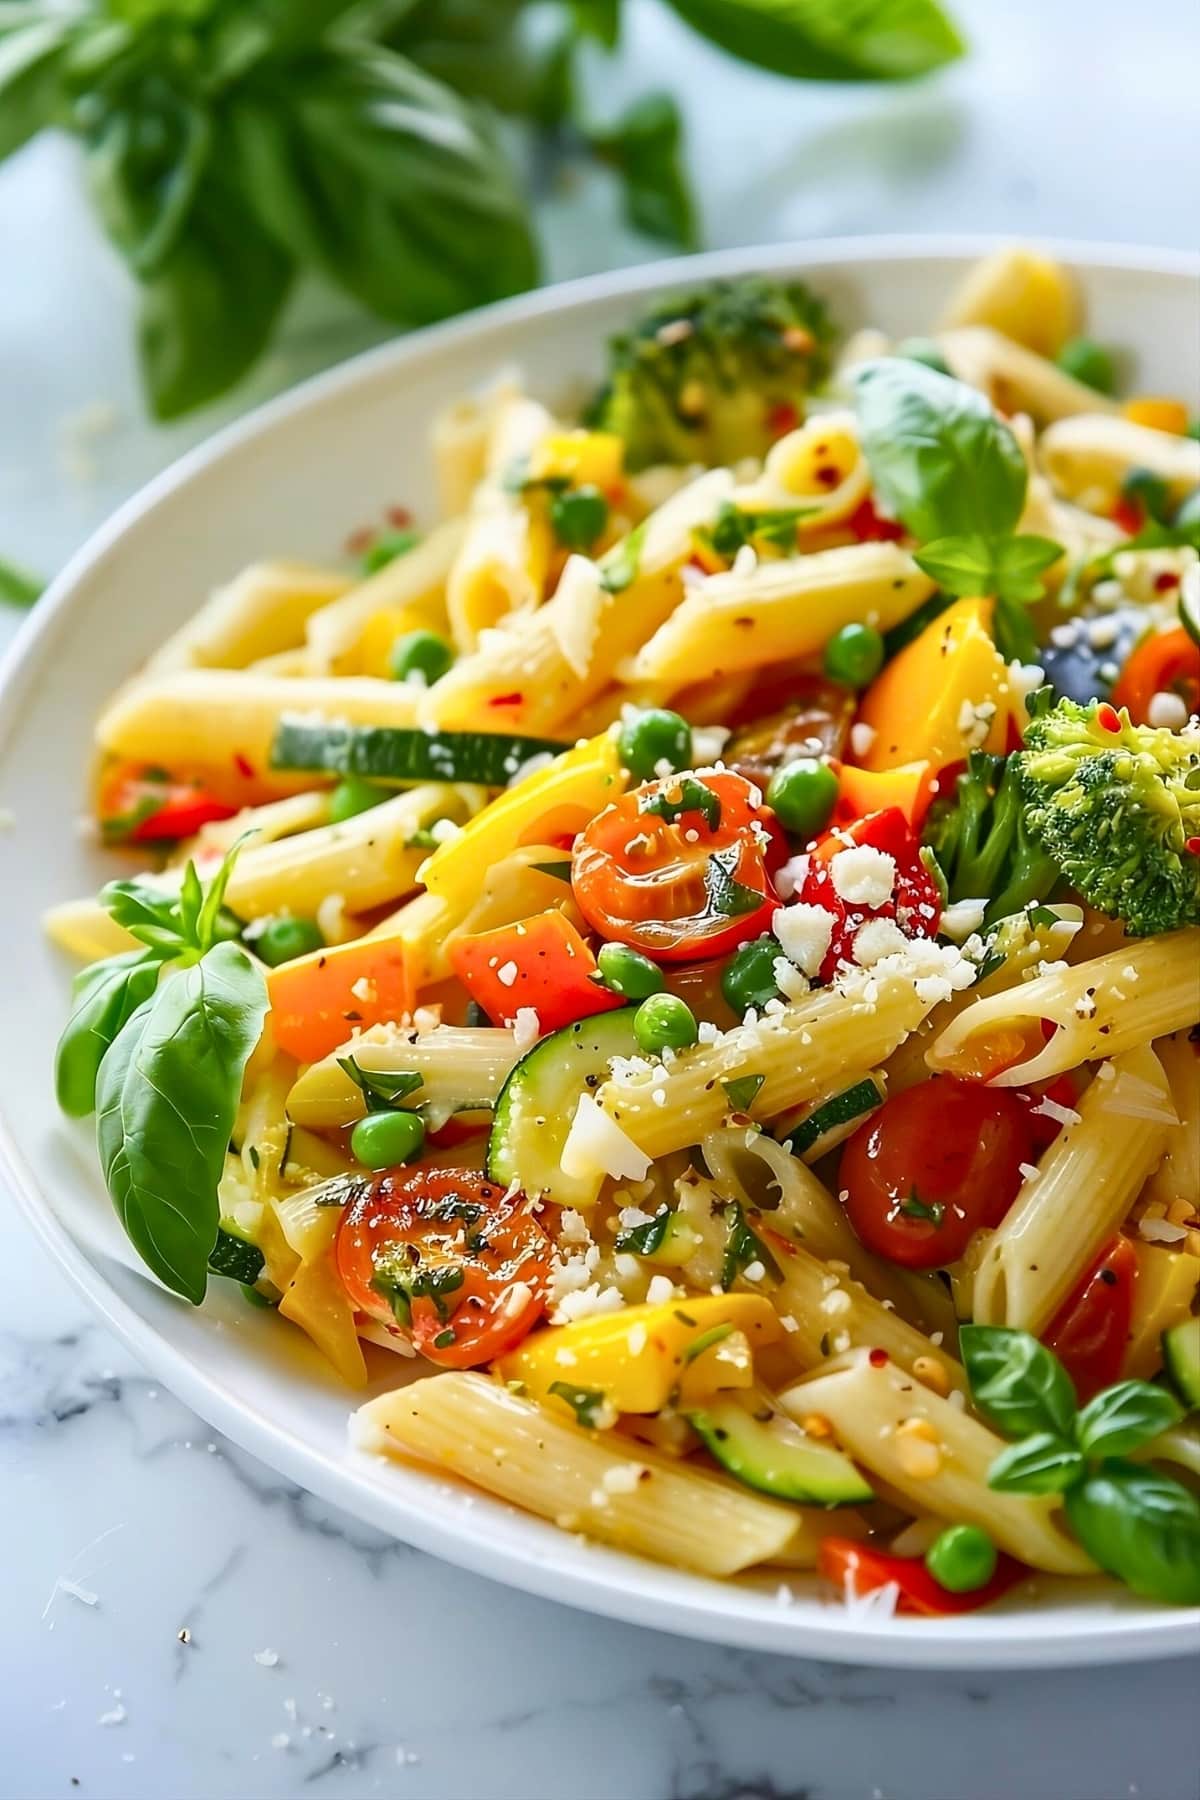 Serving of pasta primavera with Red bell pepper, Zucchini, Yellow squash, Broccoli florets, Cherry tomatoes, Frozen peas, Fresh basil, Parmesan cheese. on a white plate.